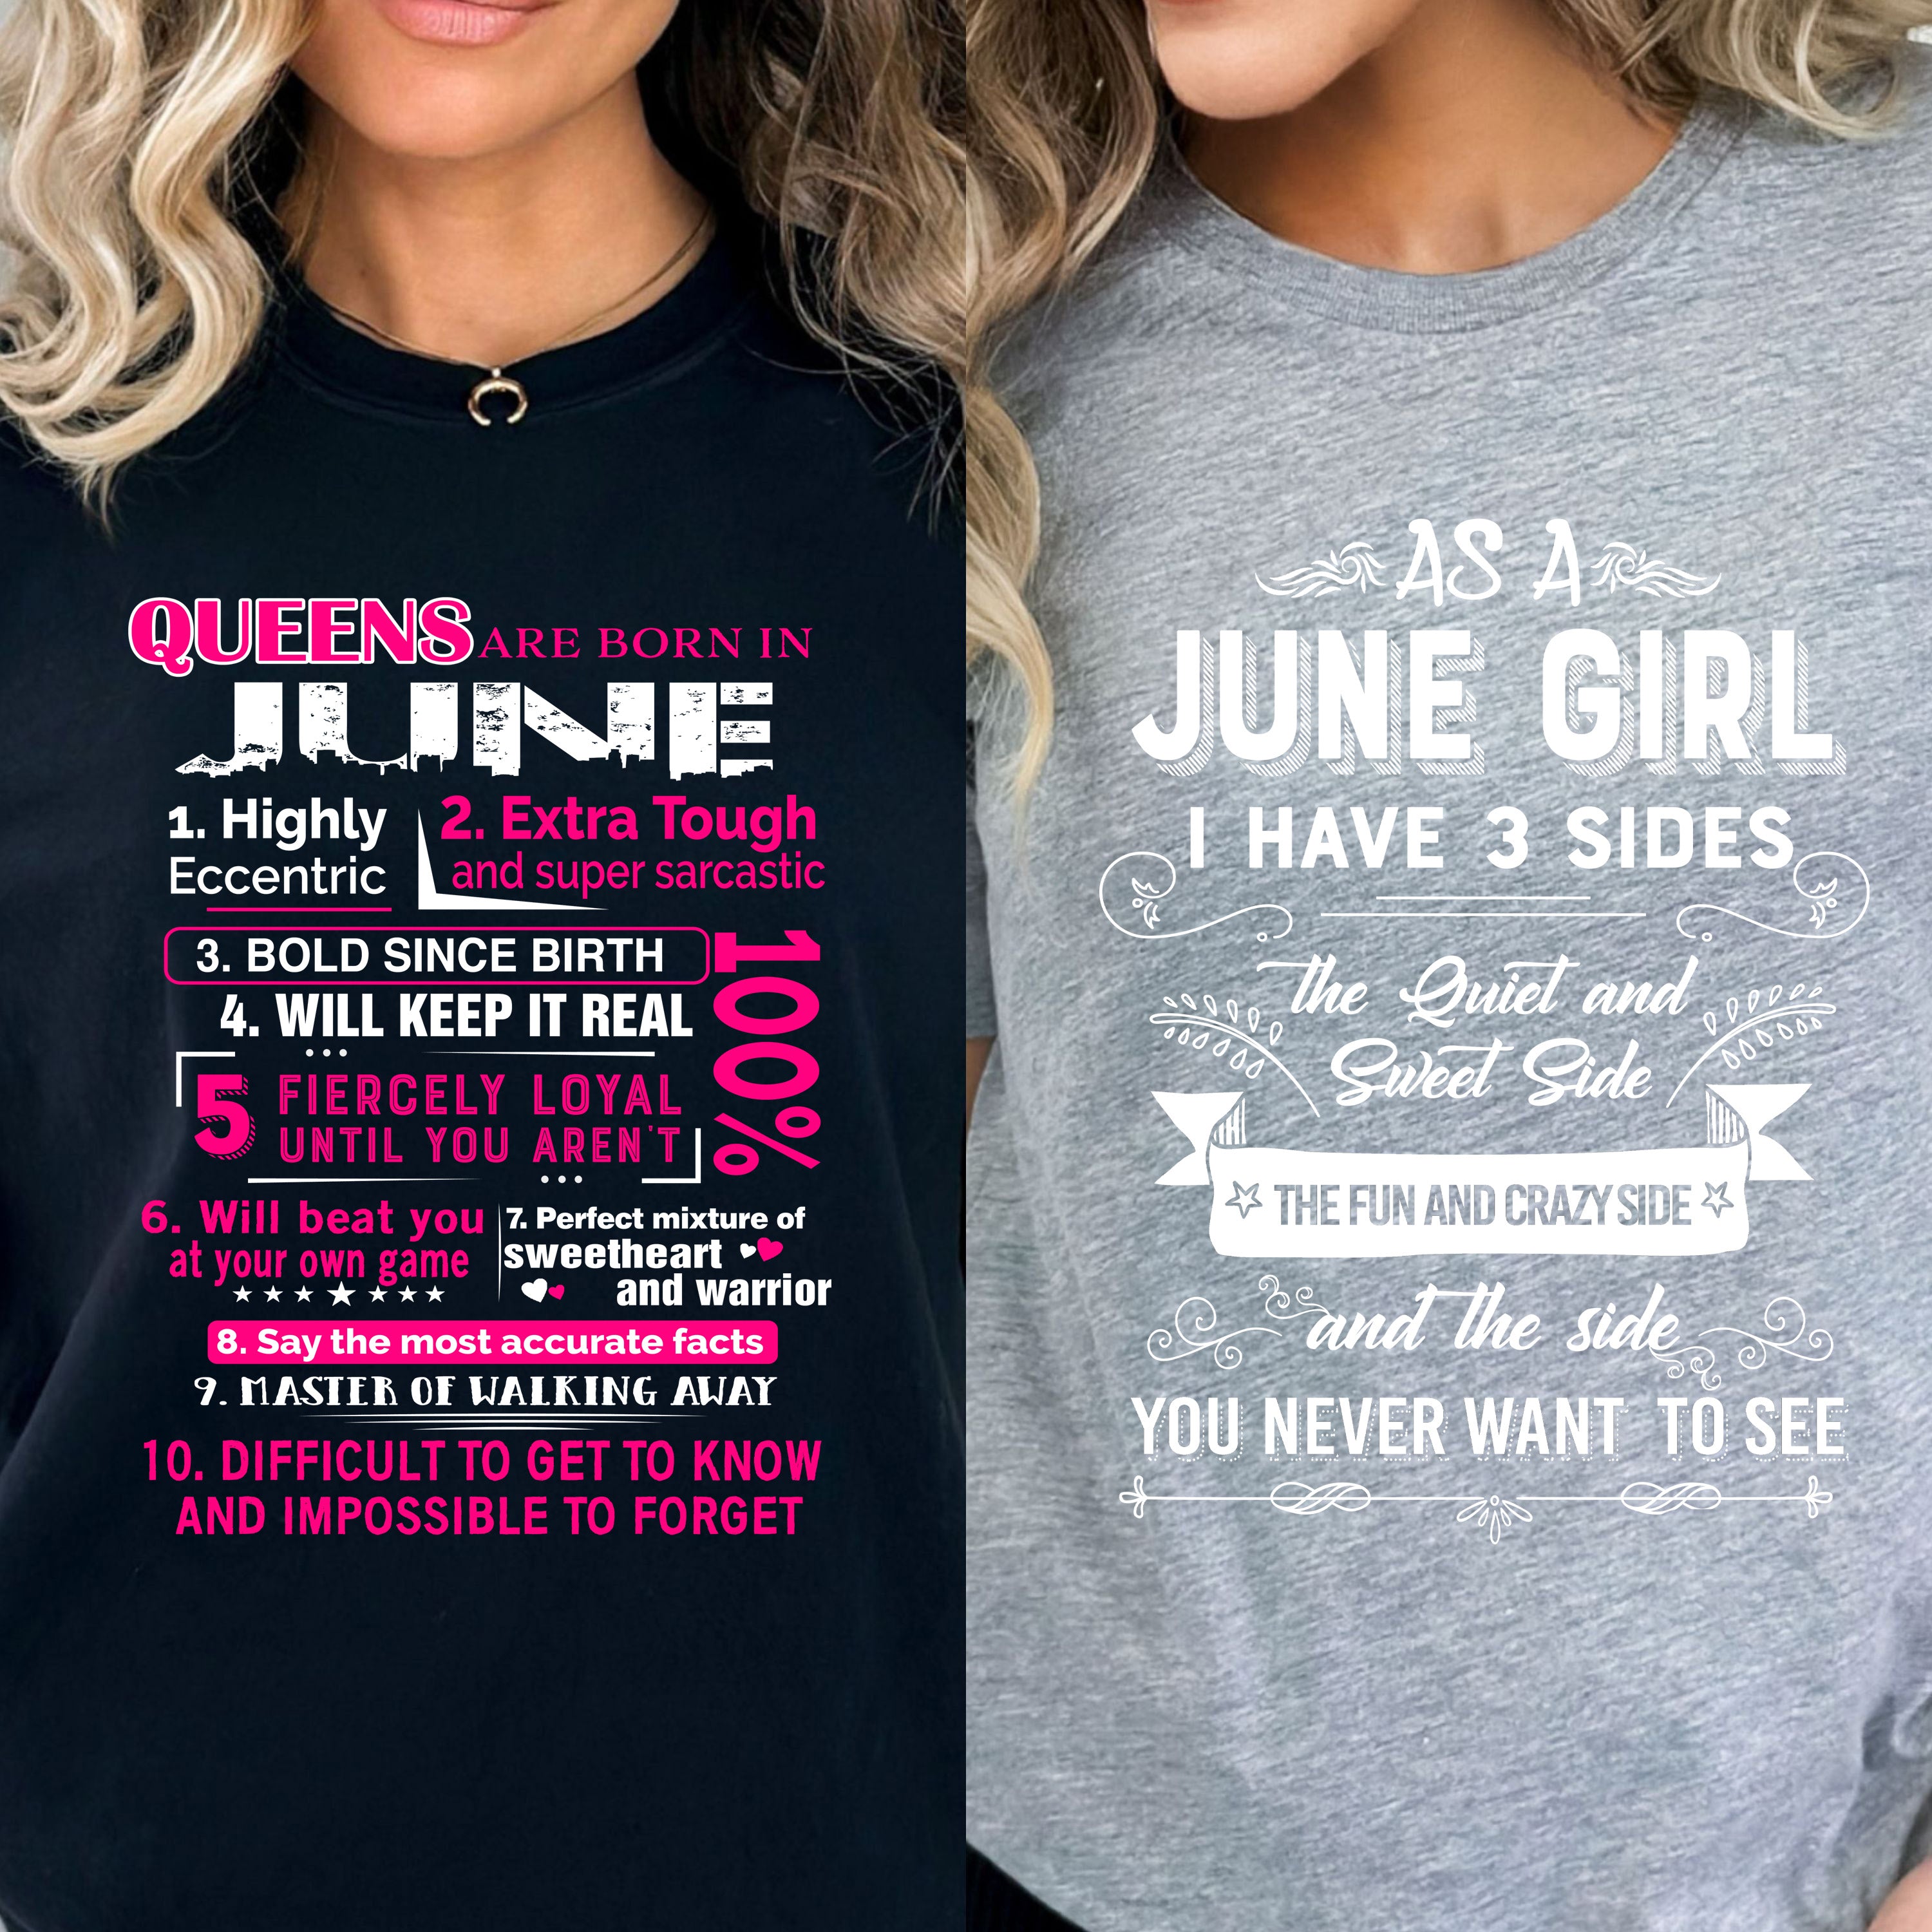 "June Queens + 3 Sides-Pack of 2",T-Shirt.